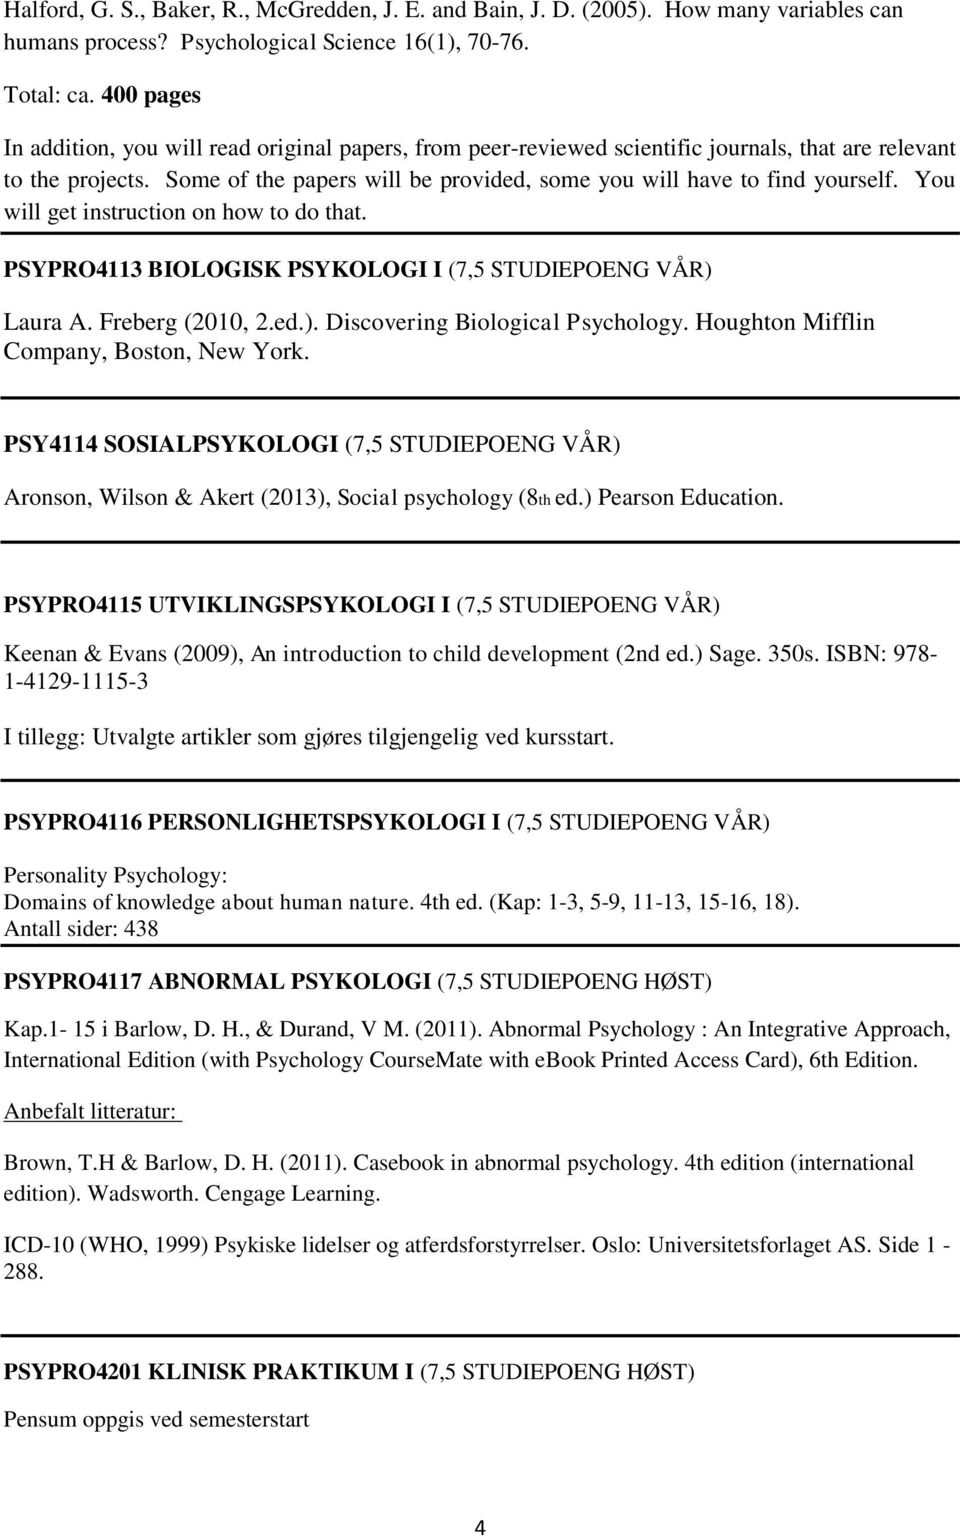 Some of the papers will be provided, some you will have to find yourself. You will get instruction on how to do that. PSYPRO4113 BIOLOGISK PSYKOLOGI I (7,5 STUDIEPOENG VÅR) Laura A. Freberg (2010, 2.